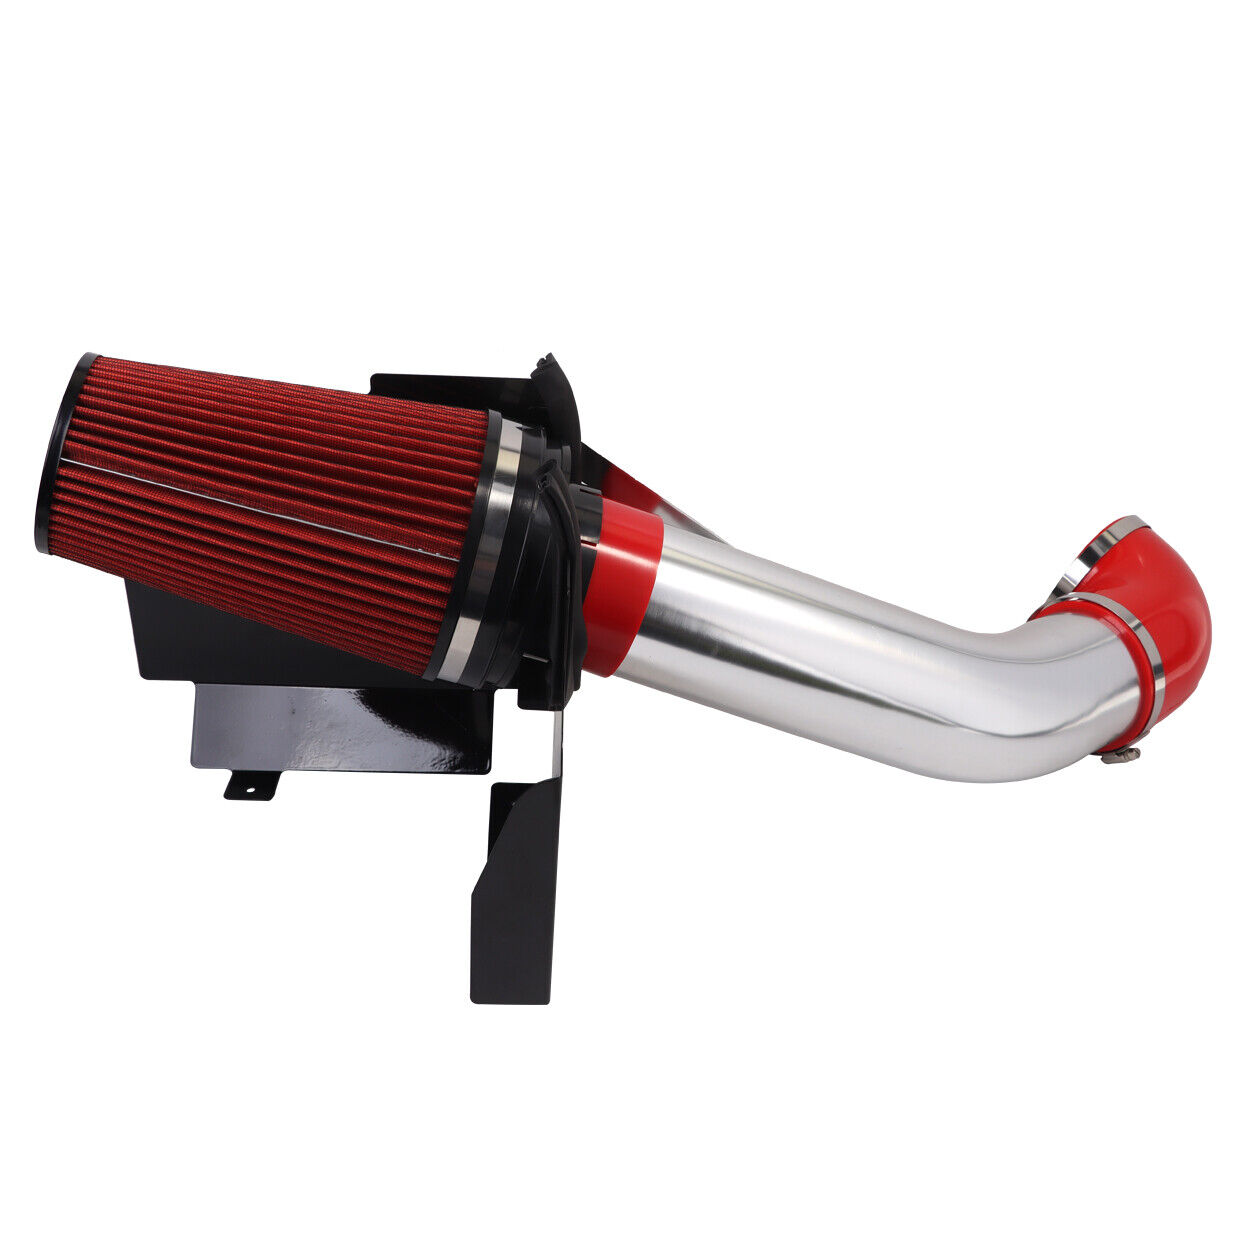 Cold Air Intake System+Heat Shield Fit For 99-06 GMC/Chevy V8 4.8L/5.3L/6.0L Red